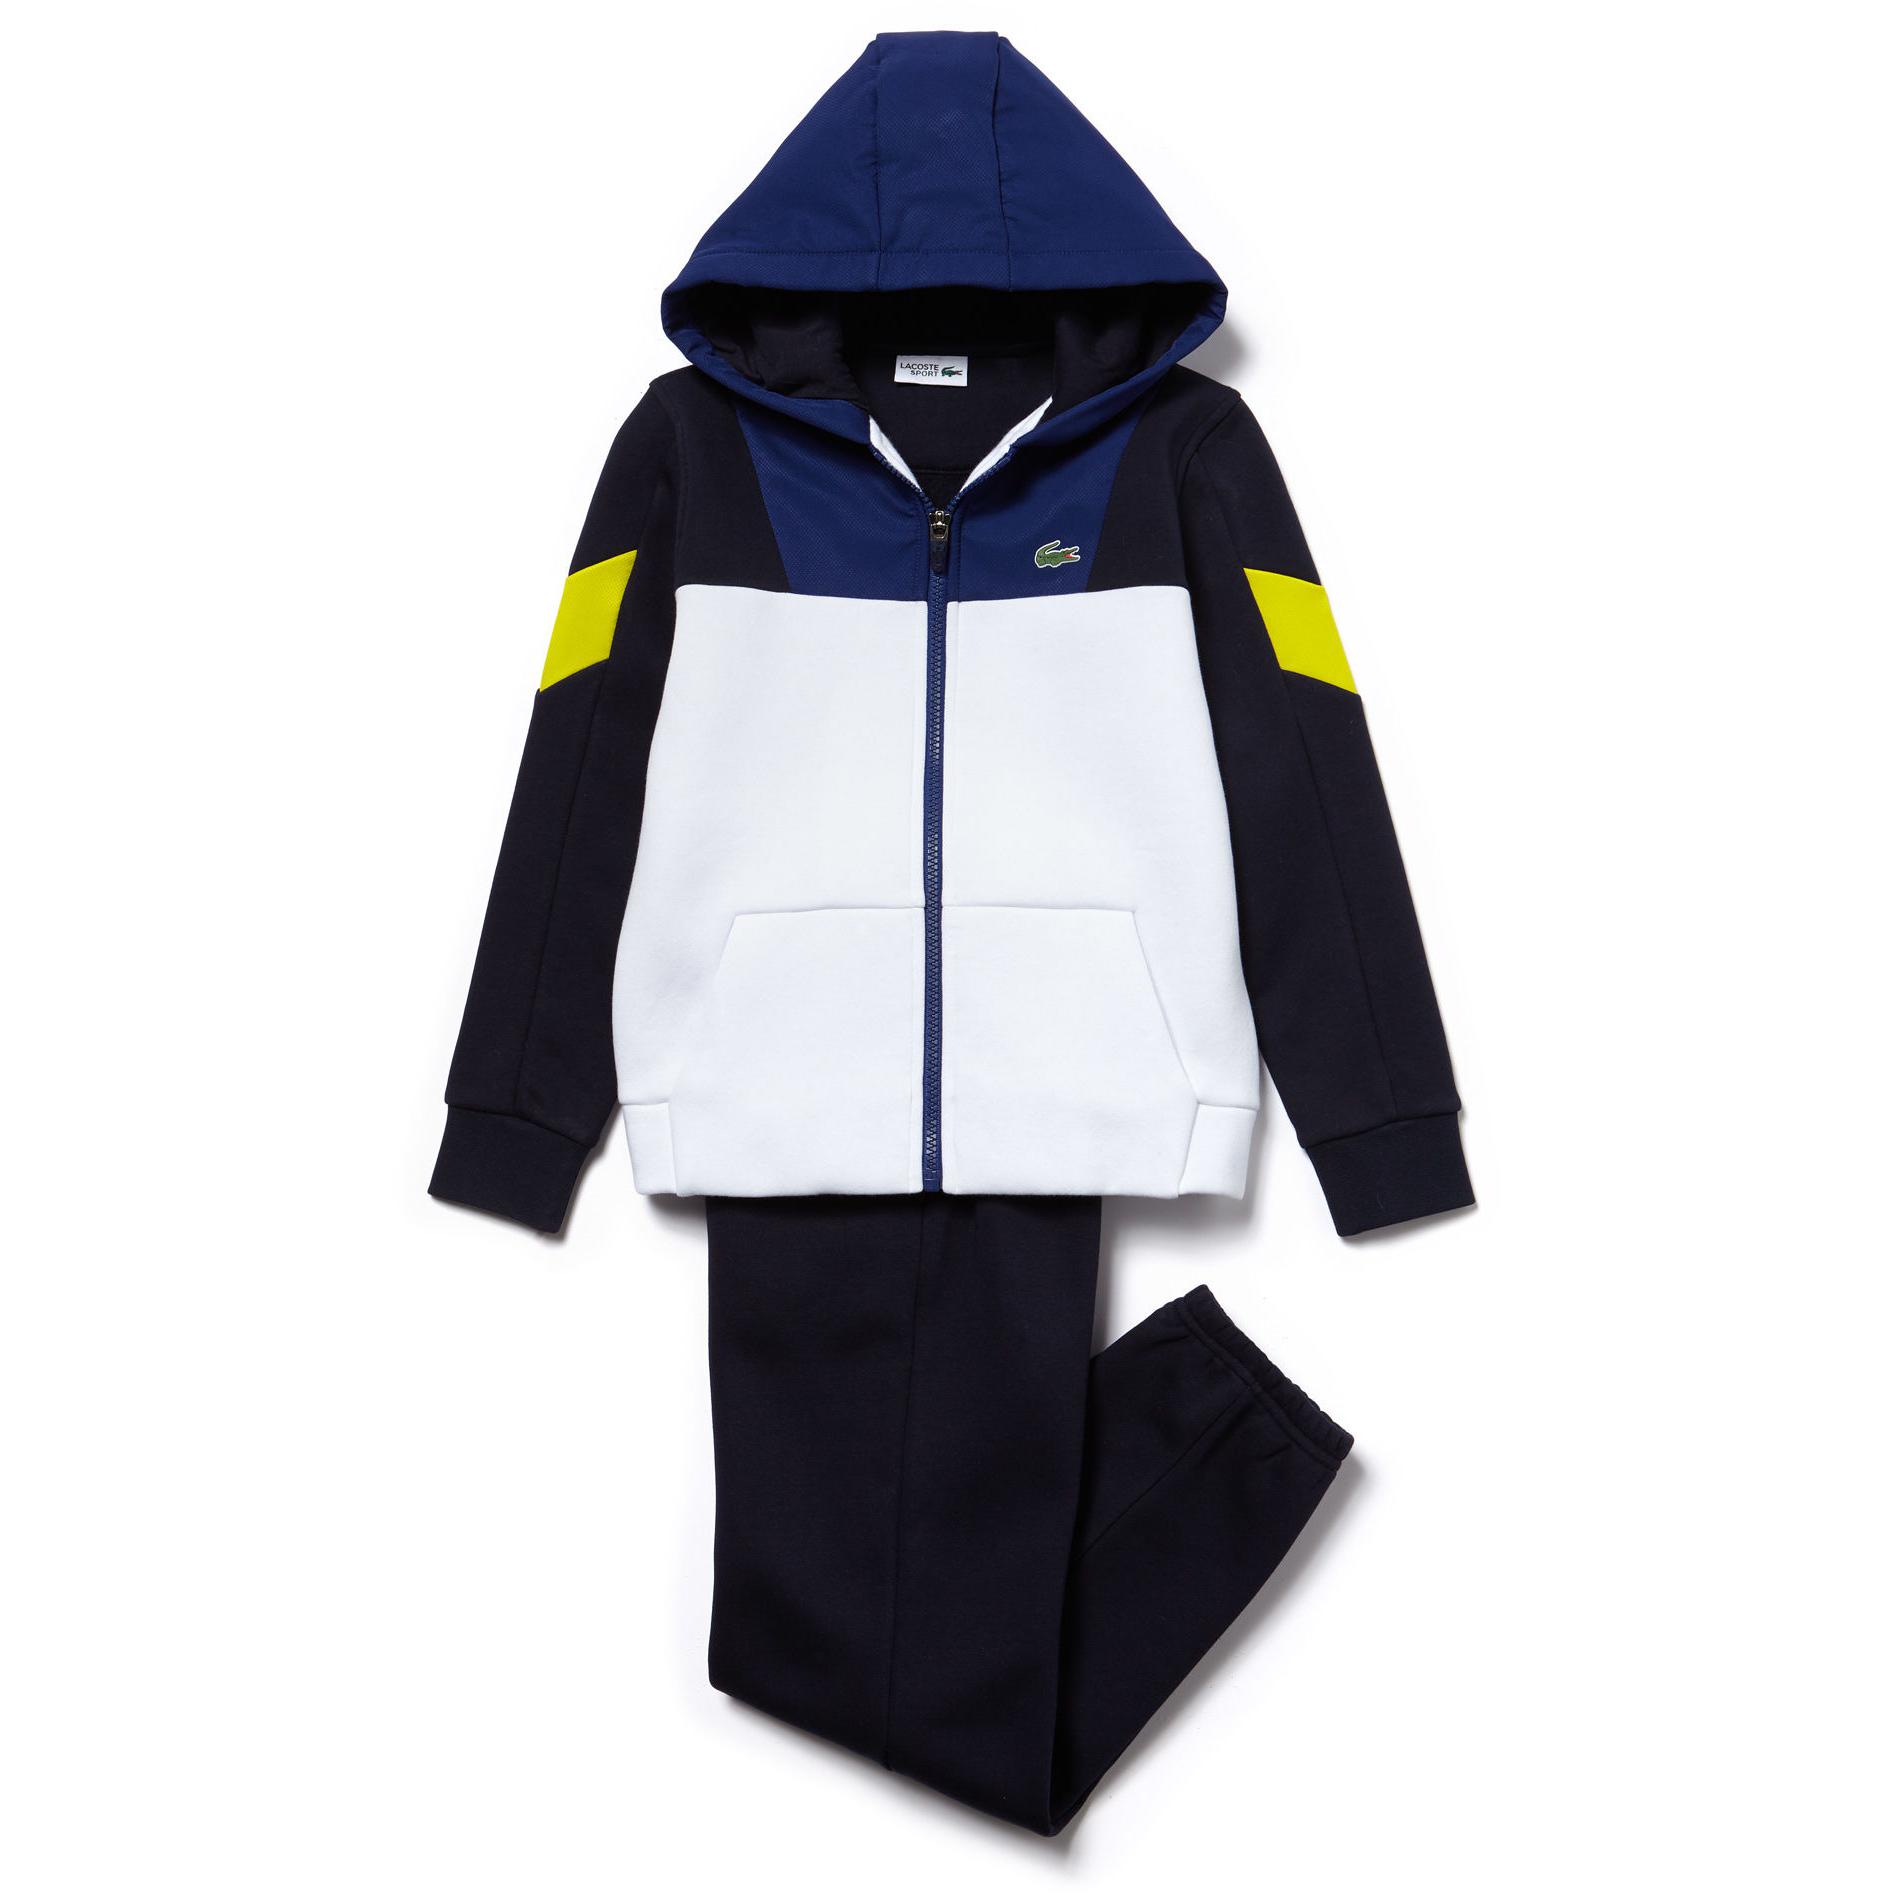 toddler lacoste tracksuit